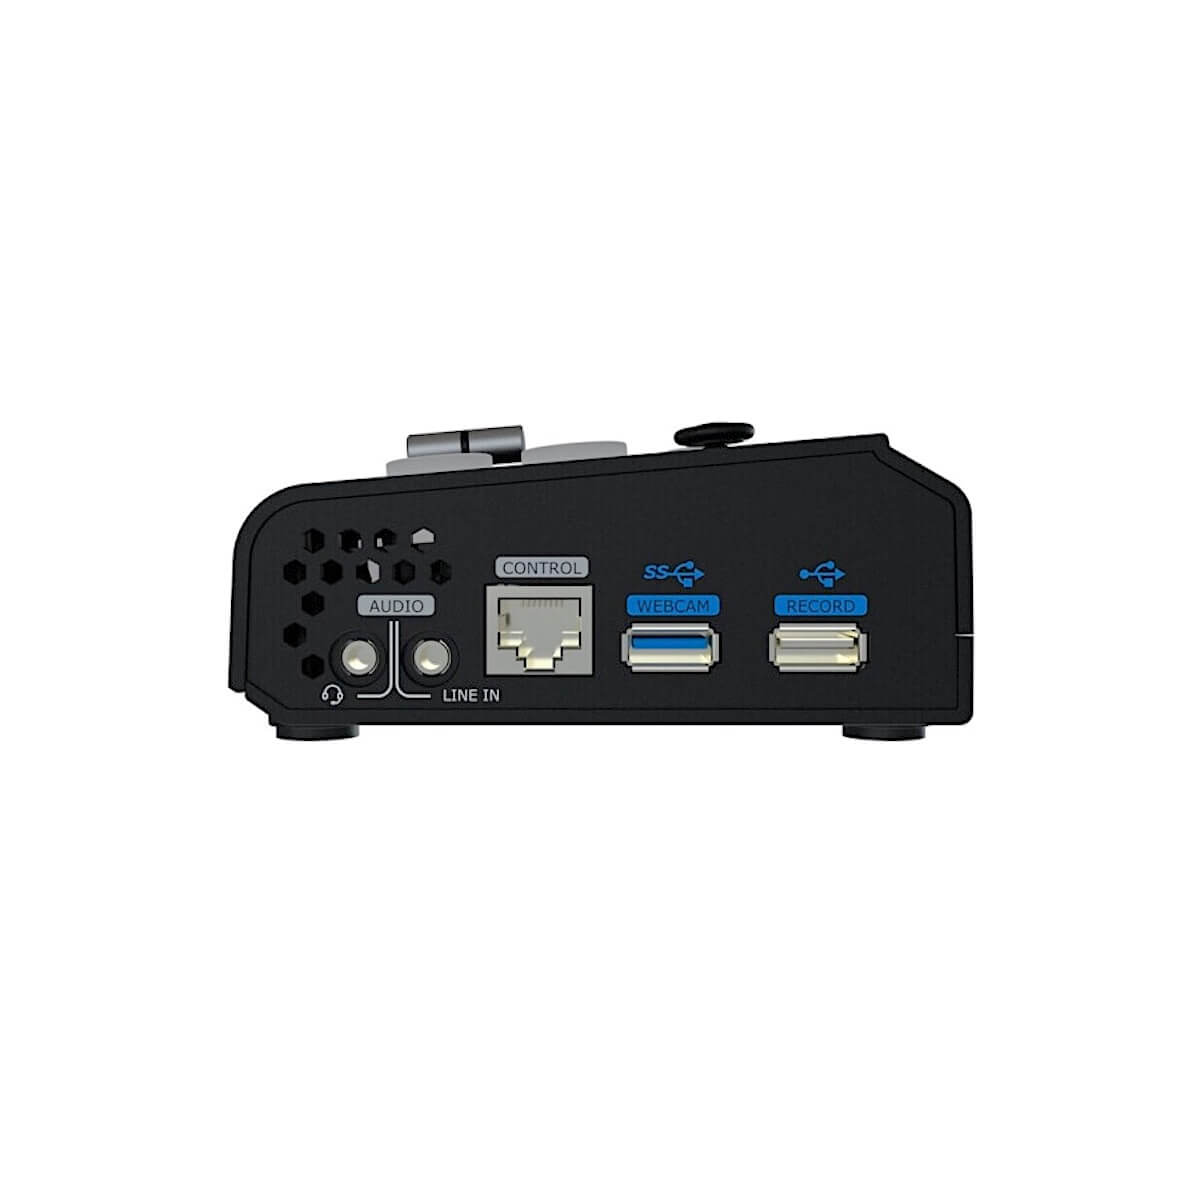 RGBlink mini-pro 4K Compact Streaming Switcher with PTZ Camera Control, side